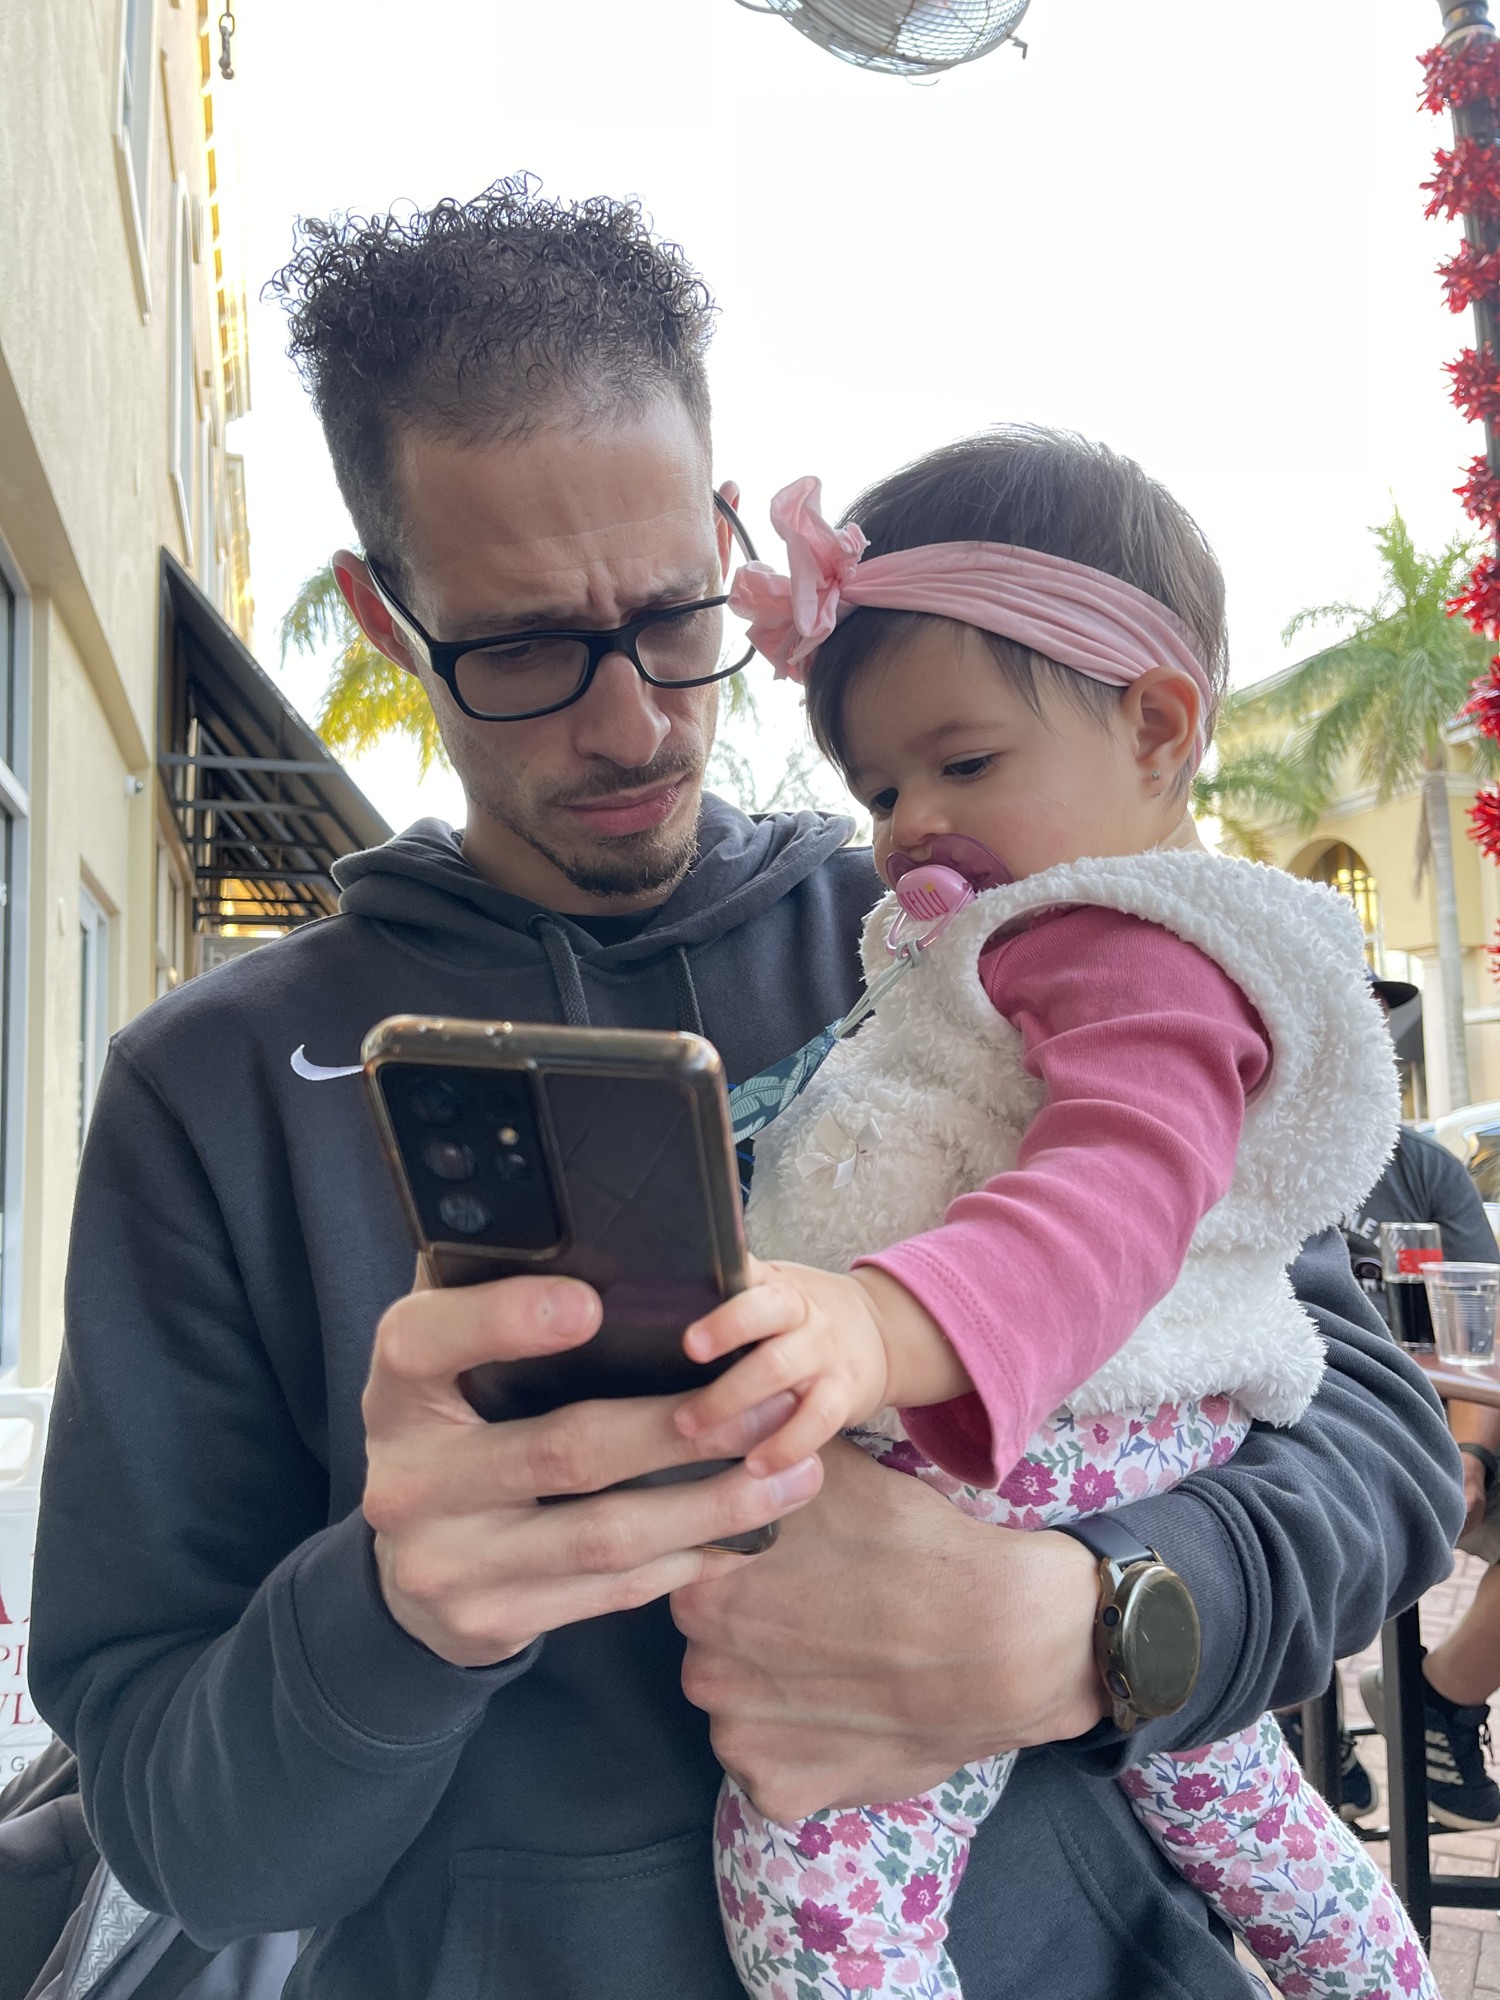 Louis Morales struggles to get a YouTube video loaded for his daughter Zara to watch while they enjoy Main Street Lakewood Ranch. Morales said he's been dealing with inconsistent service from T-Mobile for five years.